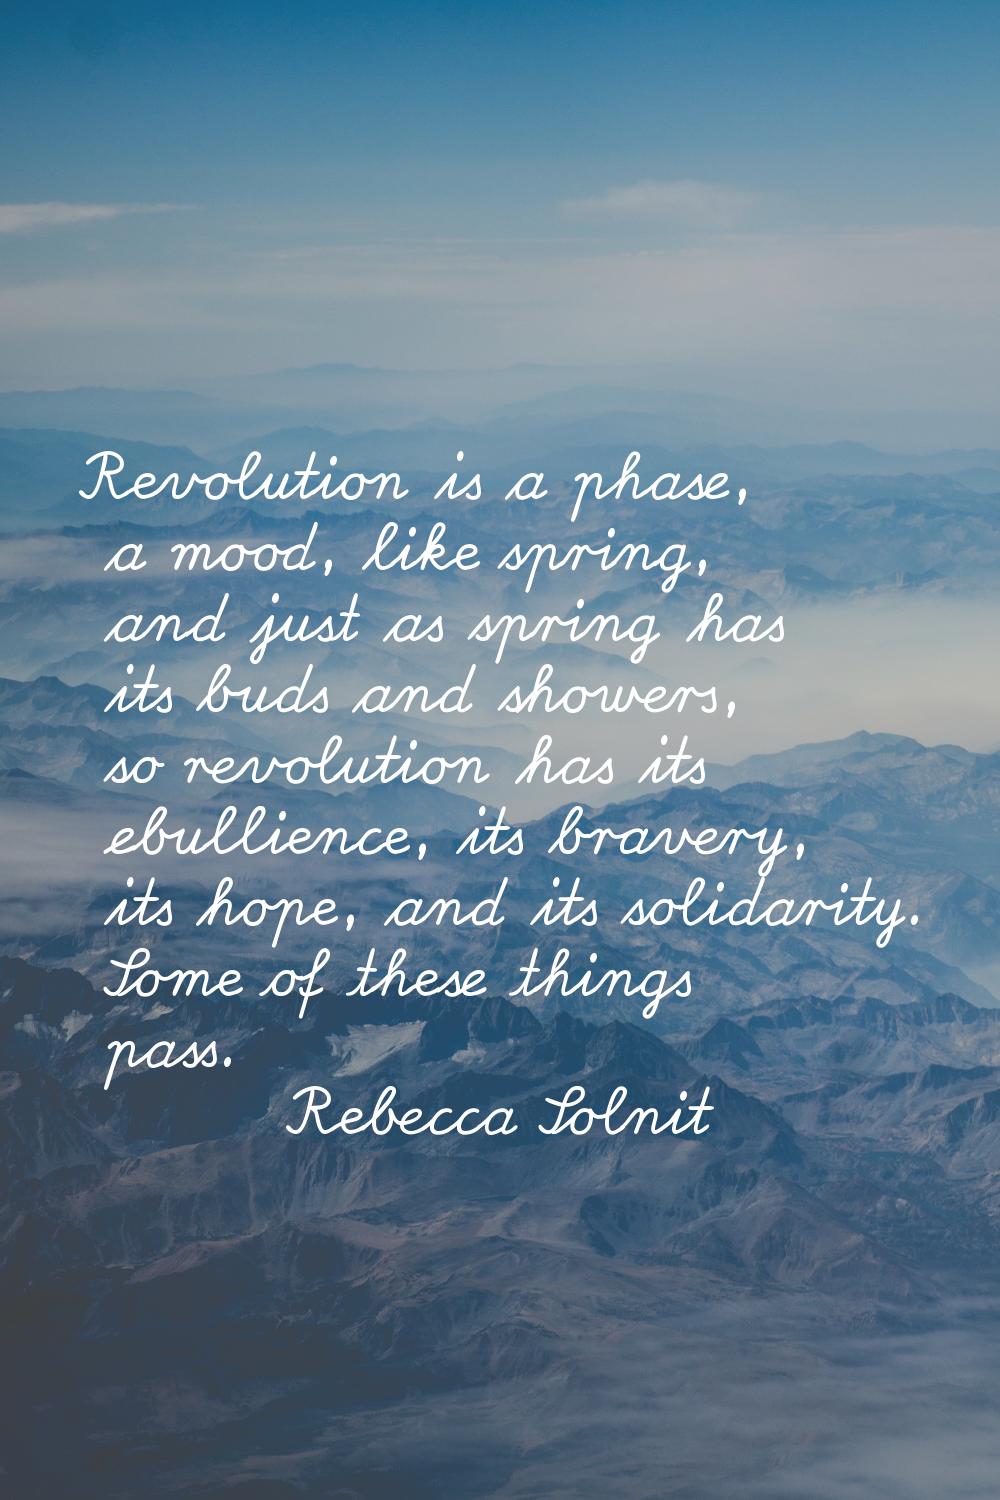 Revolution is a phase, a mood, like spring, and just as spring has its buds and showers, so revolut